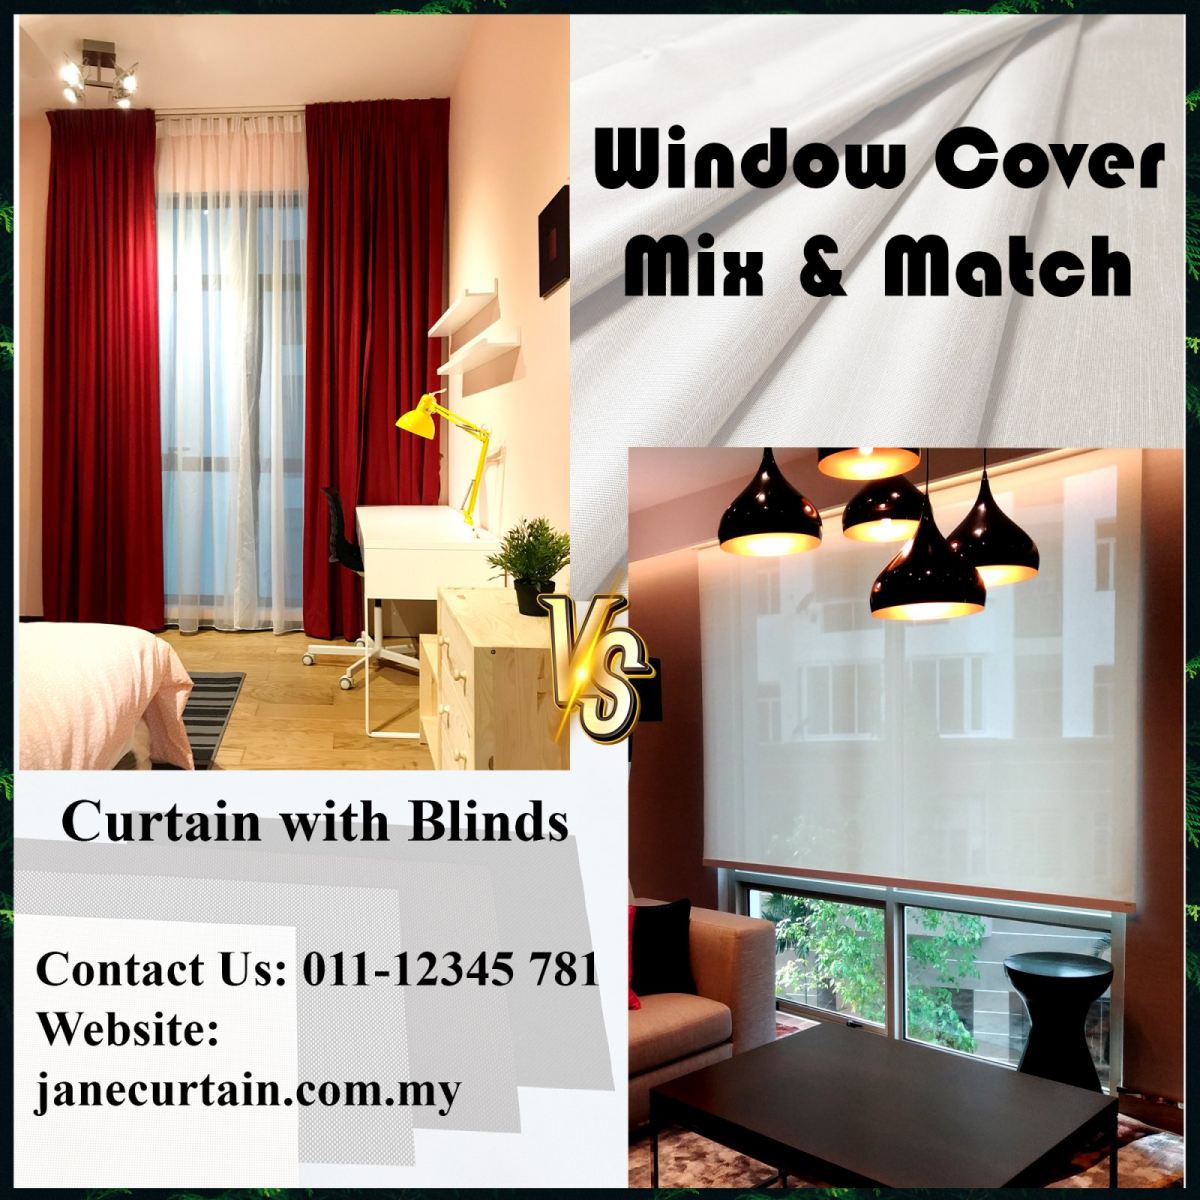 Mix & Match Window Cover Product for you home!!!